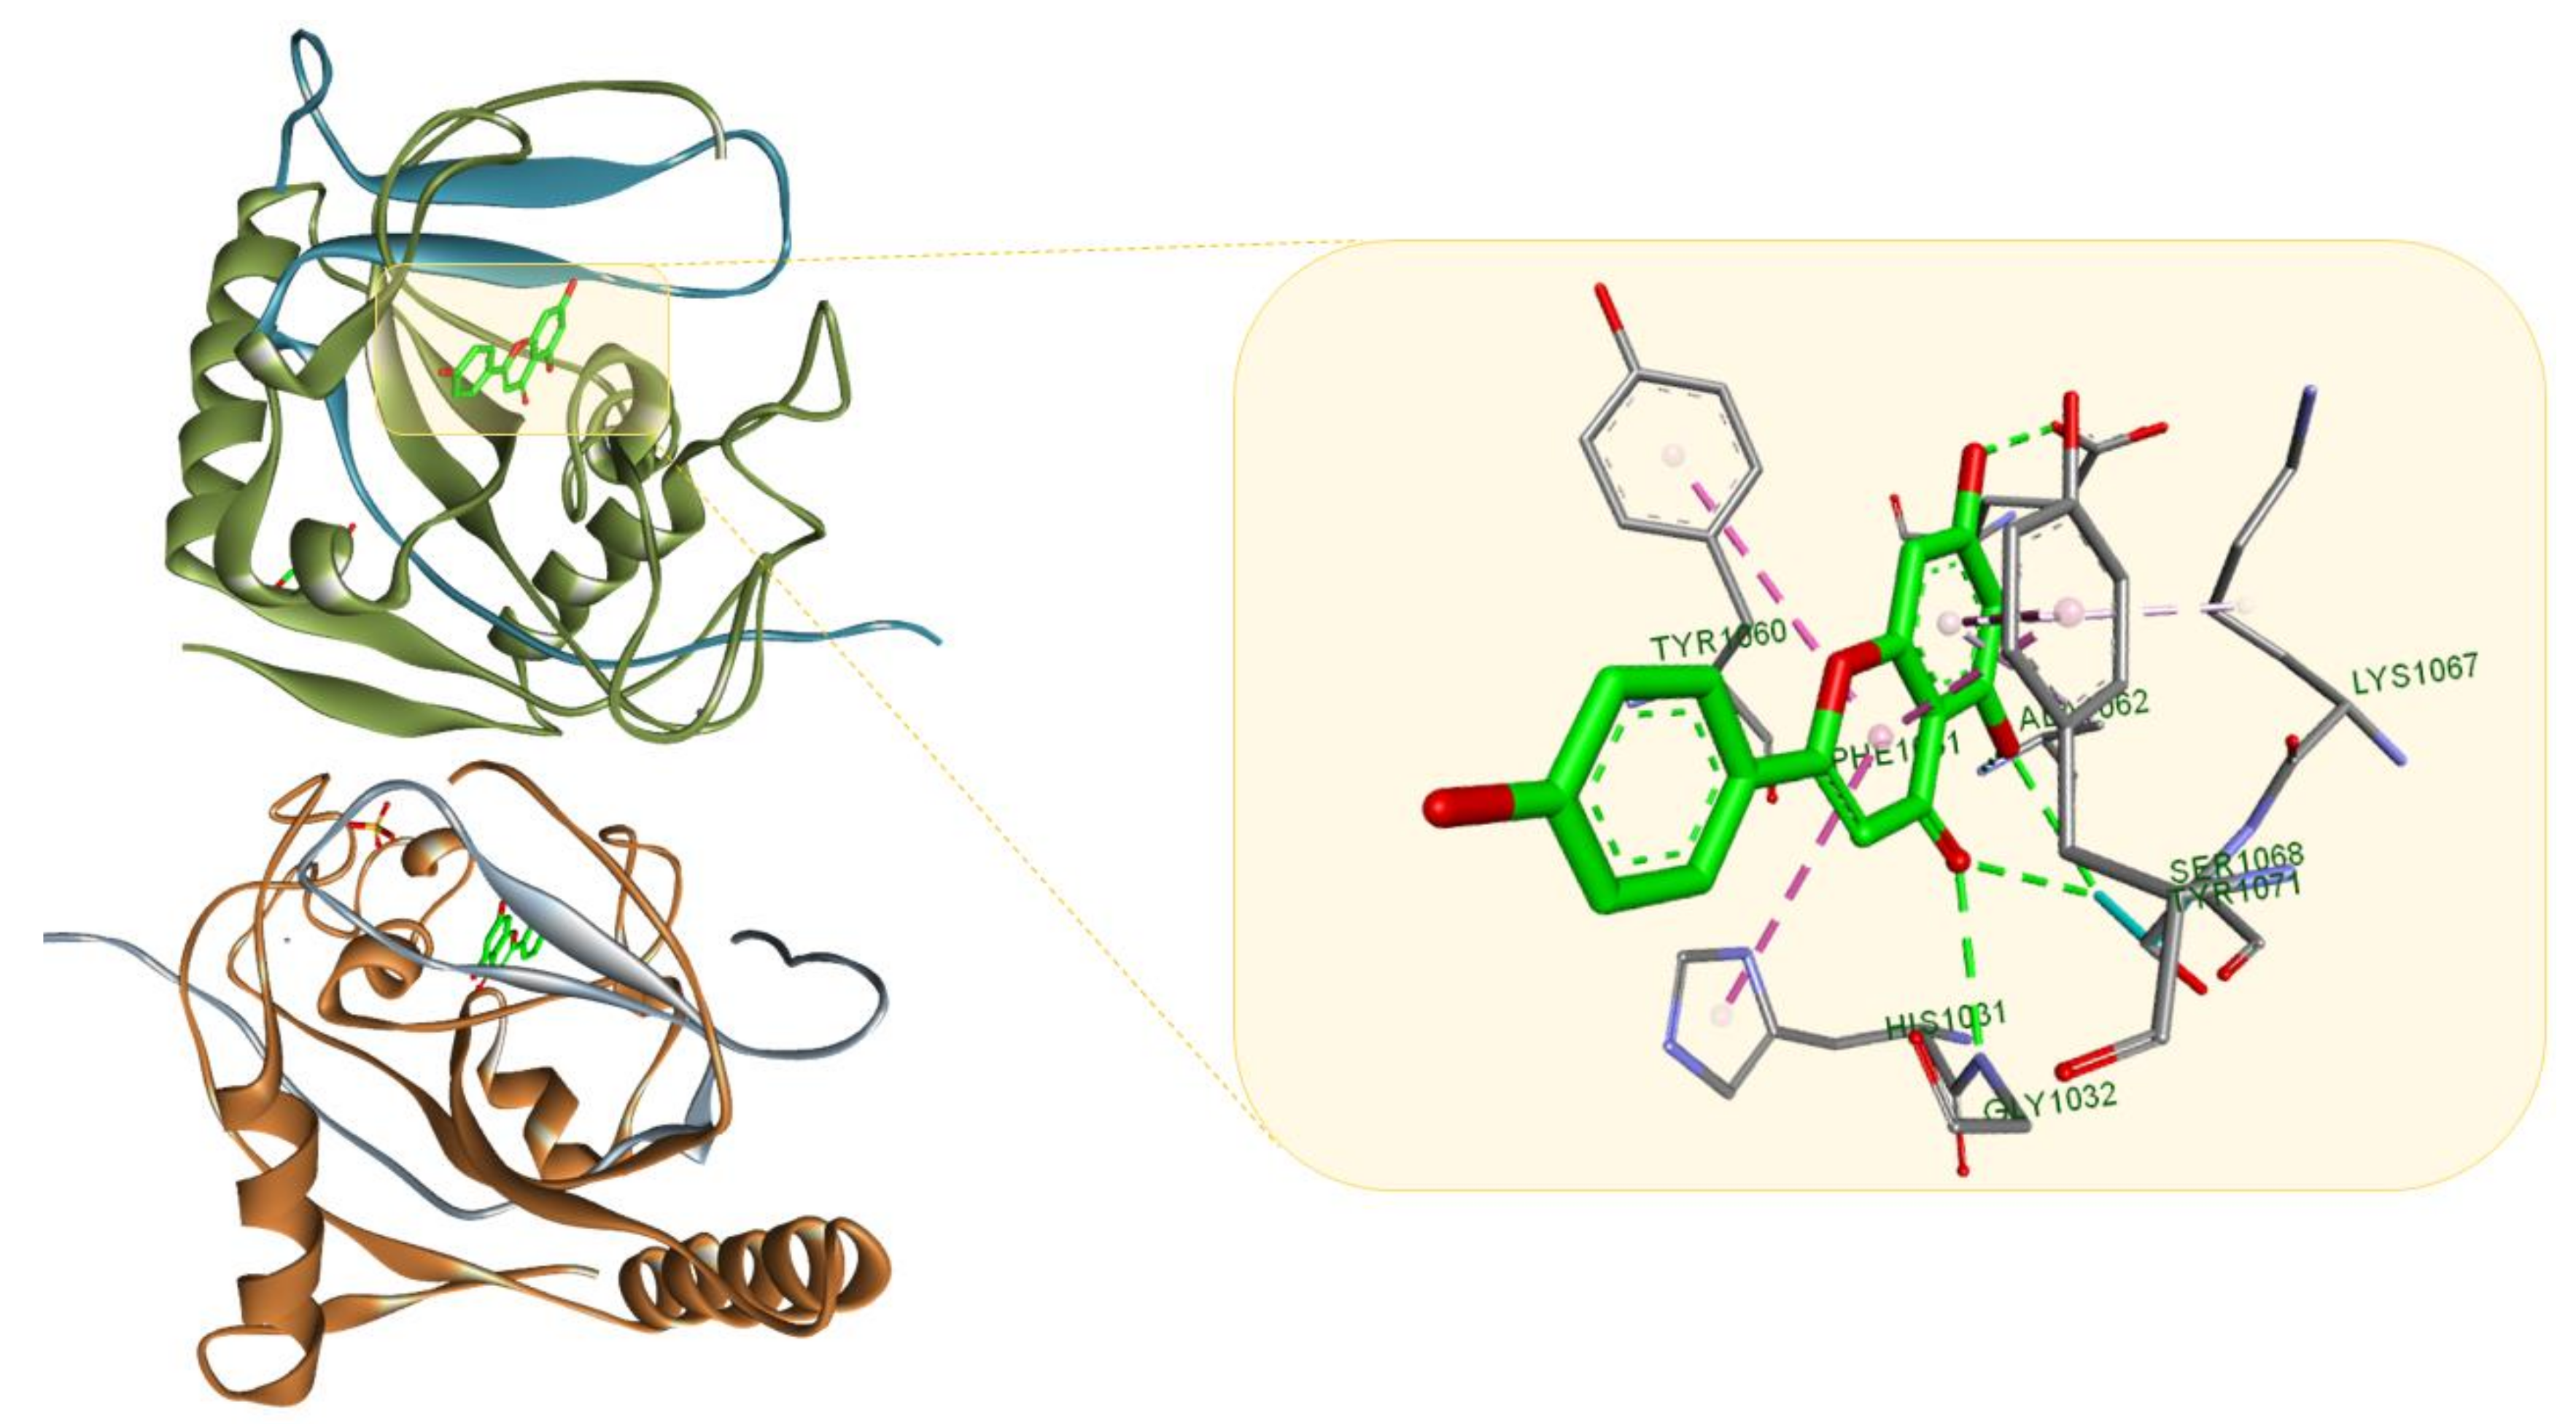 Molecules | Free Full-Text | Plant-Derived Anticancer Compounds as 